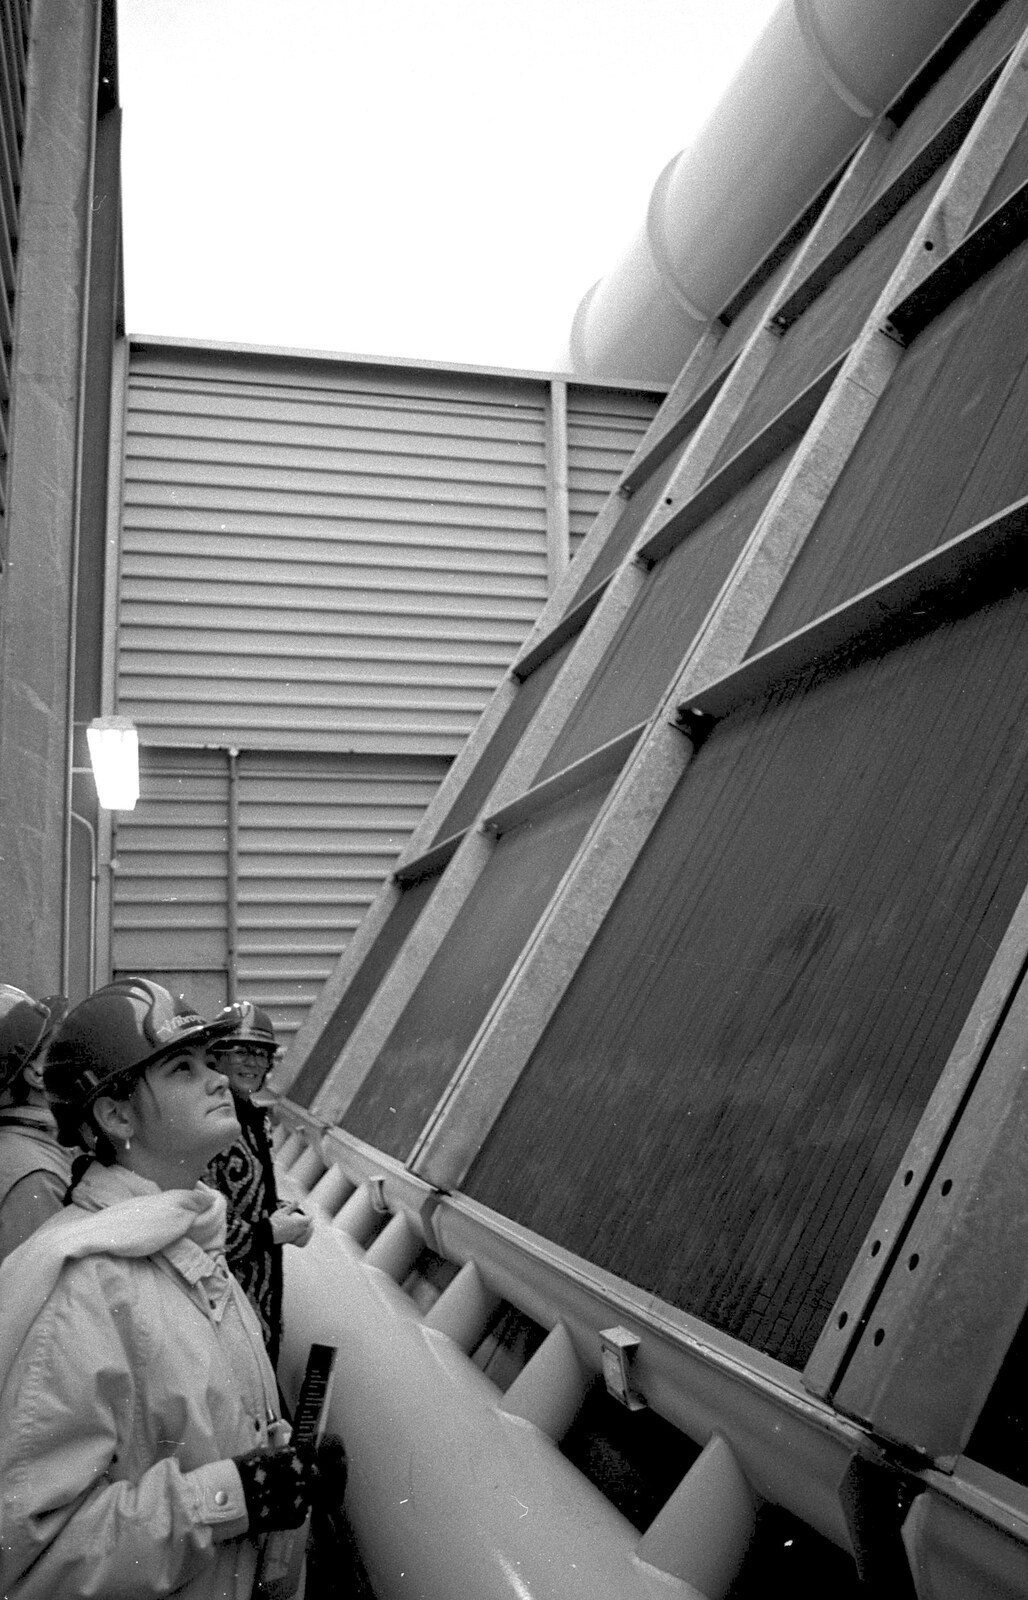 The World's First "Chicken Shit" Power Station, Brome, Eye, Suffolk - 11th July 1992: Claire looks up at the heat exchangers (radiators)